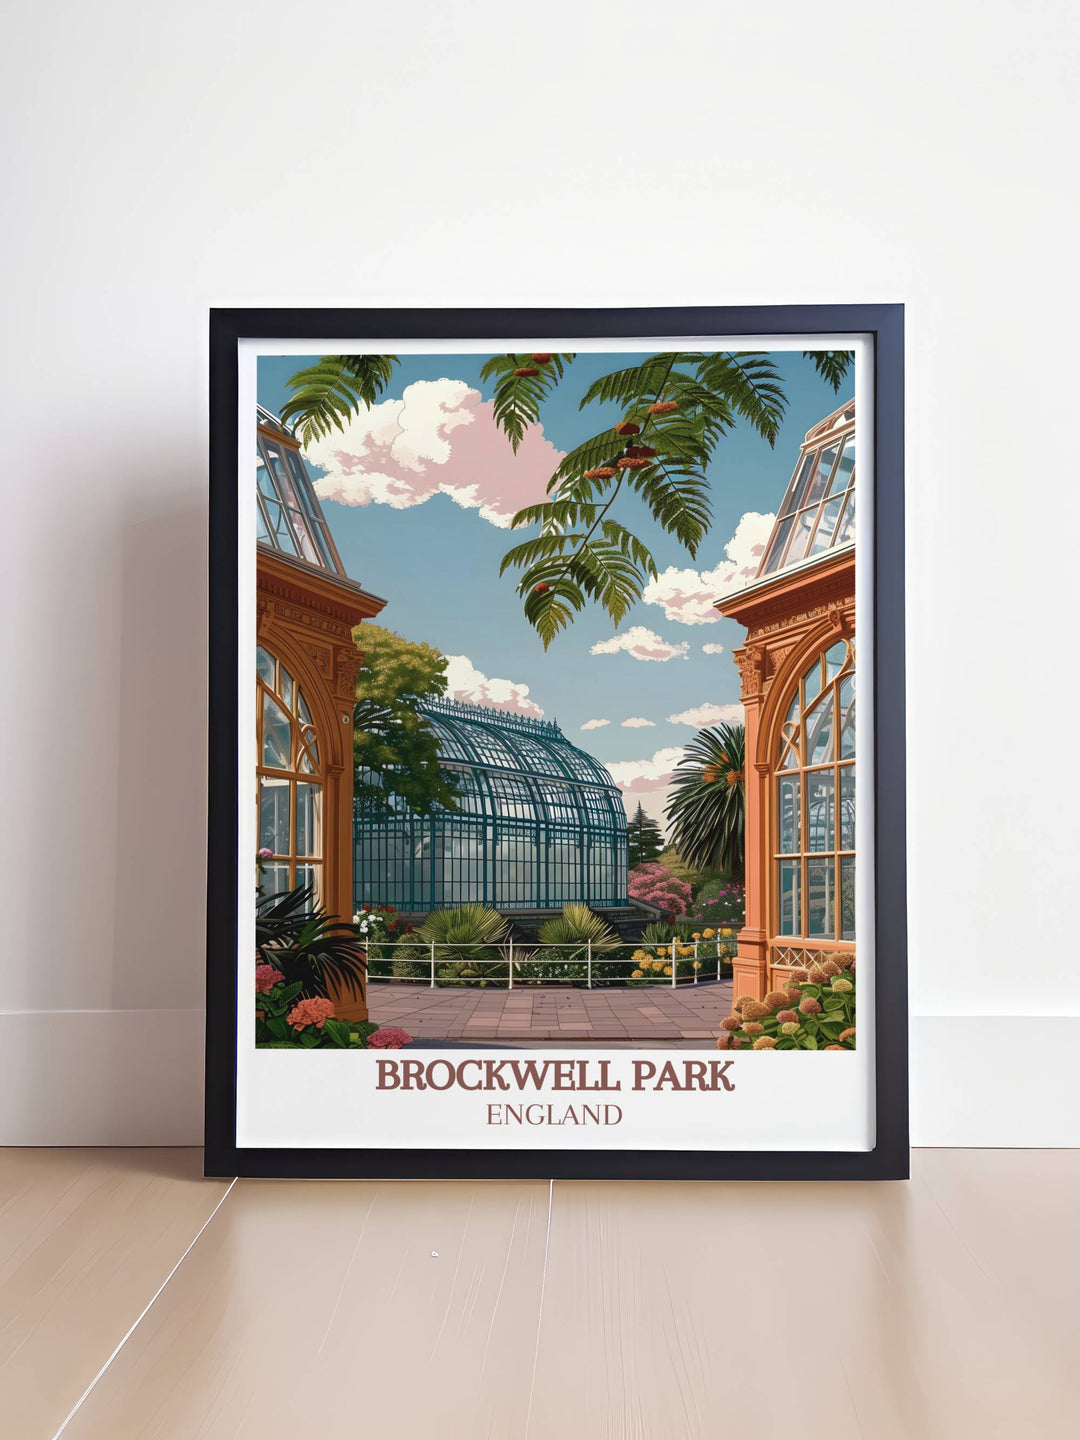 Brockwell Park Greenhouses in a minimalist art style, focusing on the elegant lines and botanical details